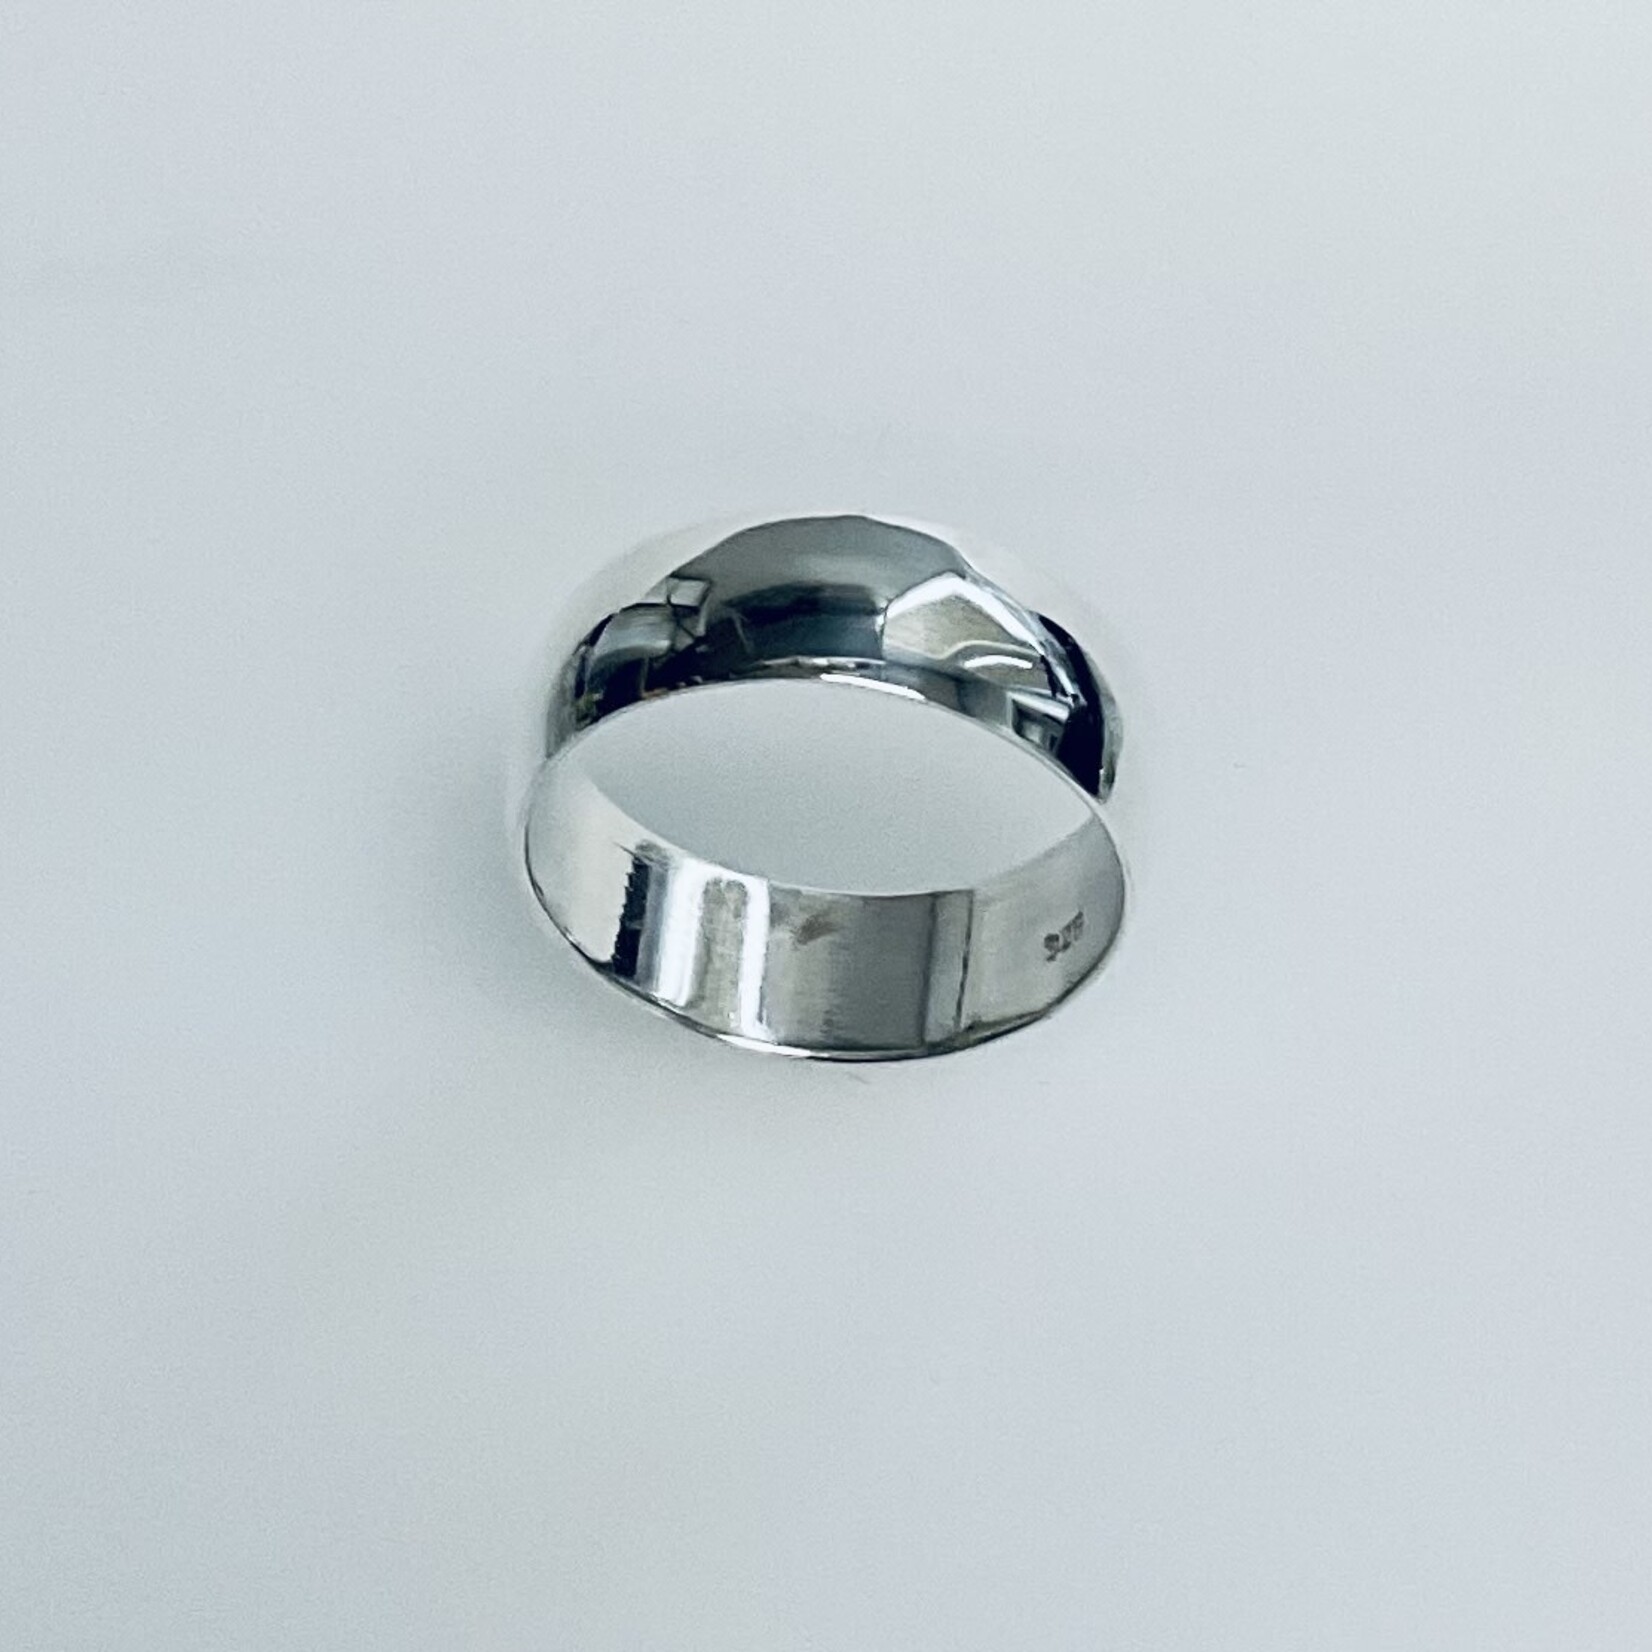 Wedding Band Ring/ Silver Size 10.75/7MM